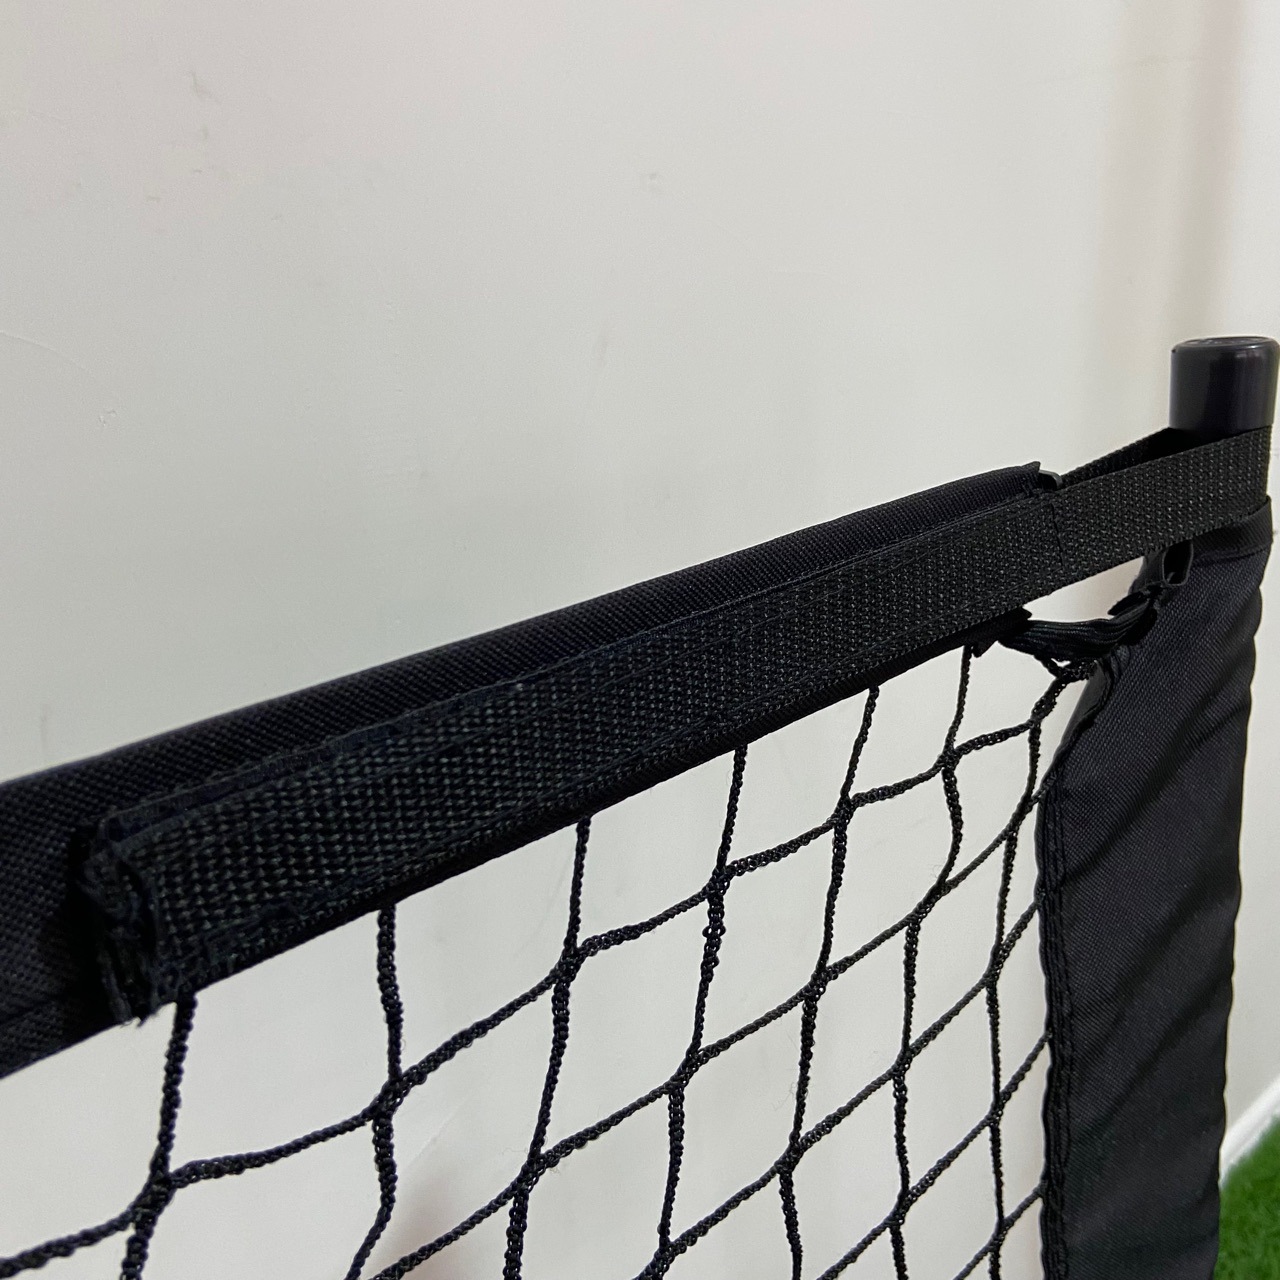 Factory Price Heavy Duty Pickleball Net with Wheels 22 FT Regulation Size Steady Metal Frame and PE Net for All Weather Conditions Outdoor Indoor